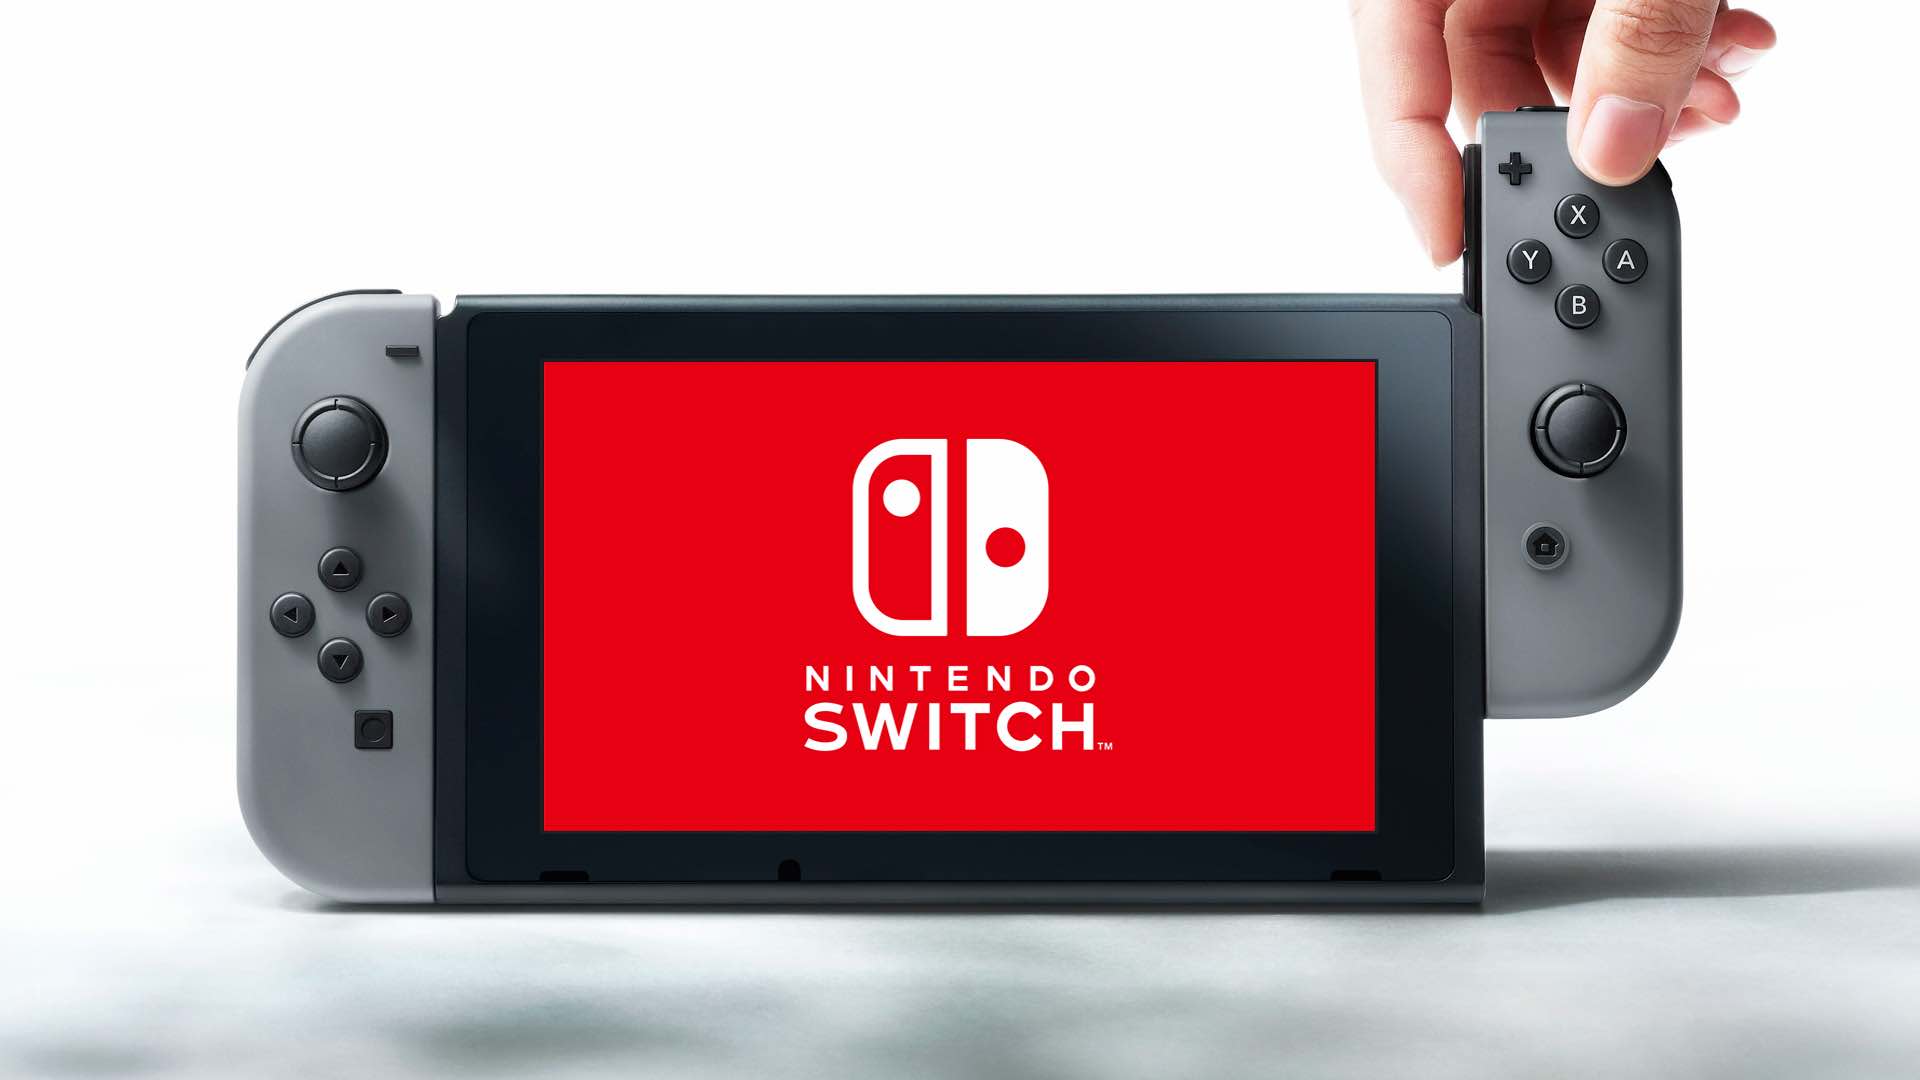 Nintendo Switch 'Final Fantasy XIV' Could Come To Nintendo Switch